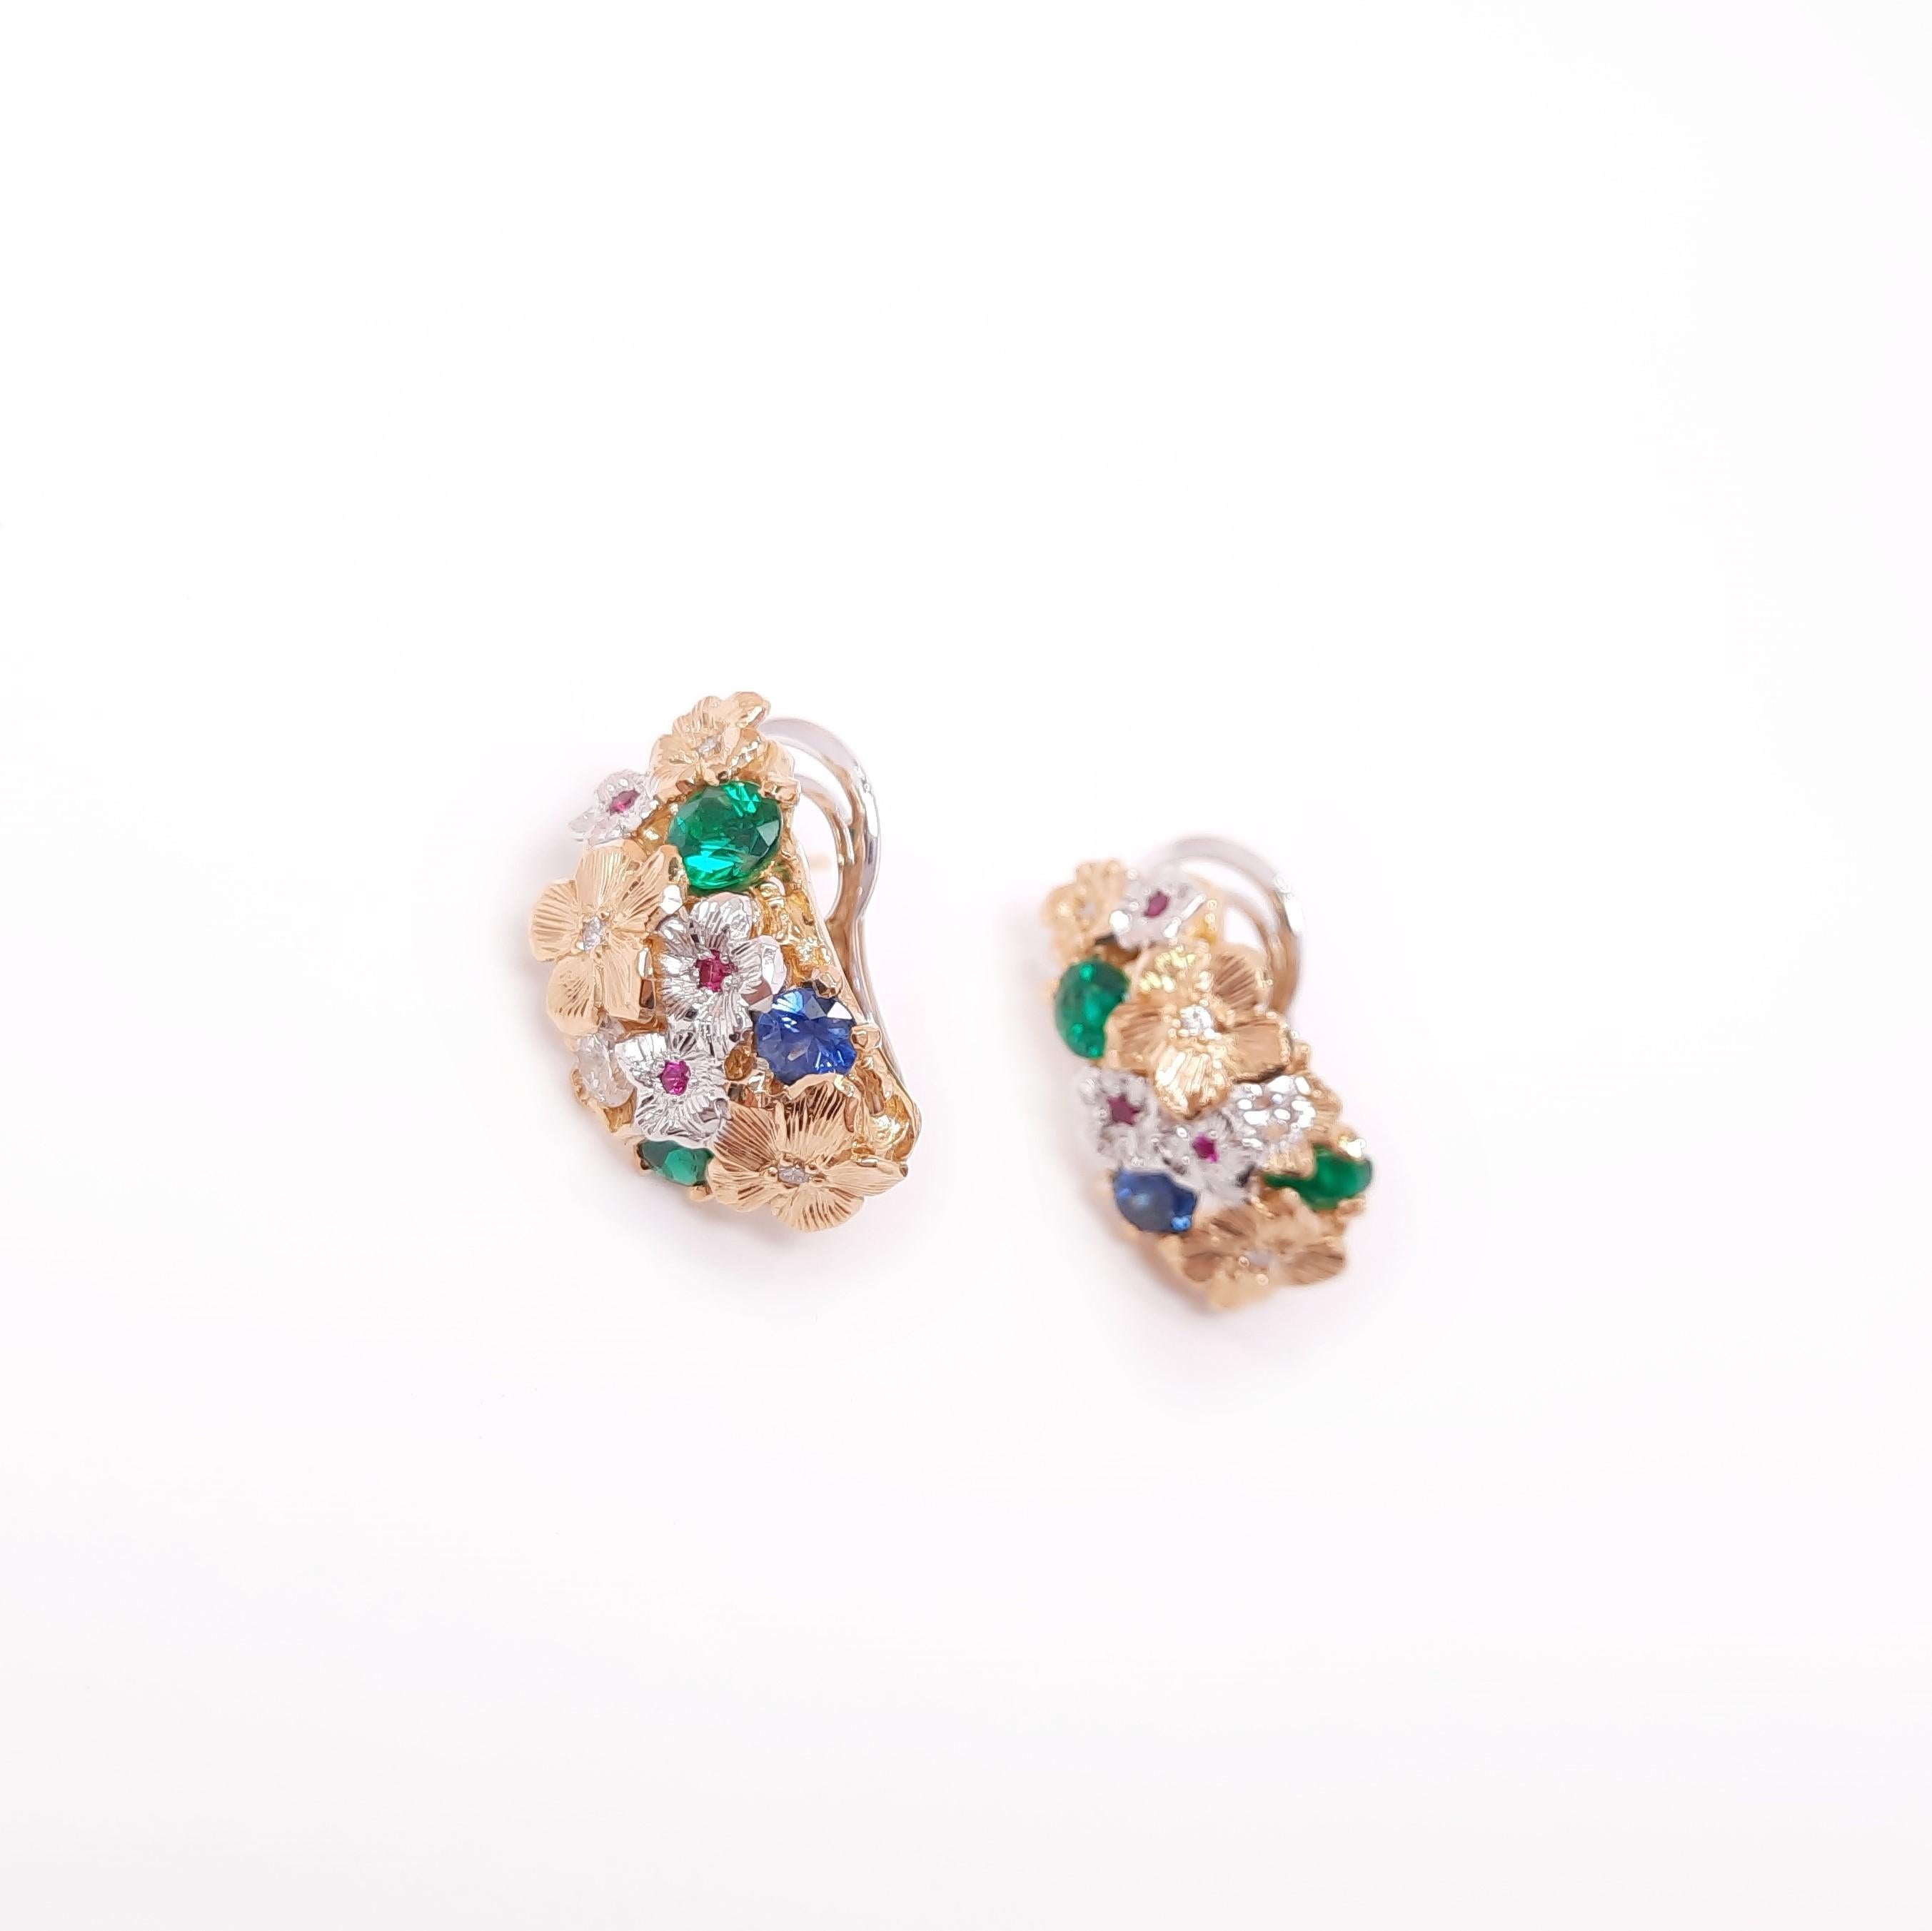 Inspired by Impressionism, MOISEIKIN® has created a blooming flower earrings  in tridimensional manner. Trembling flowers and sweet fragrance of coming ripe fruits are embodied  in gems and metals. Inside the flower bouquets, diamonds, emeralds, and